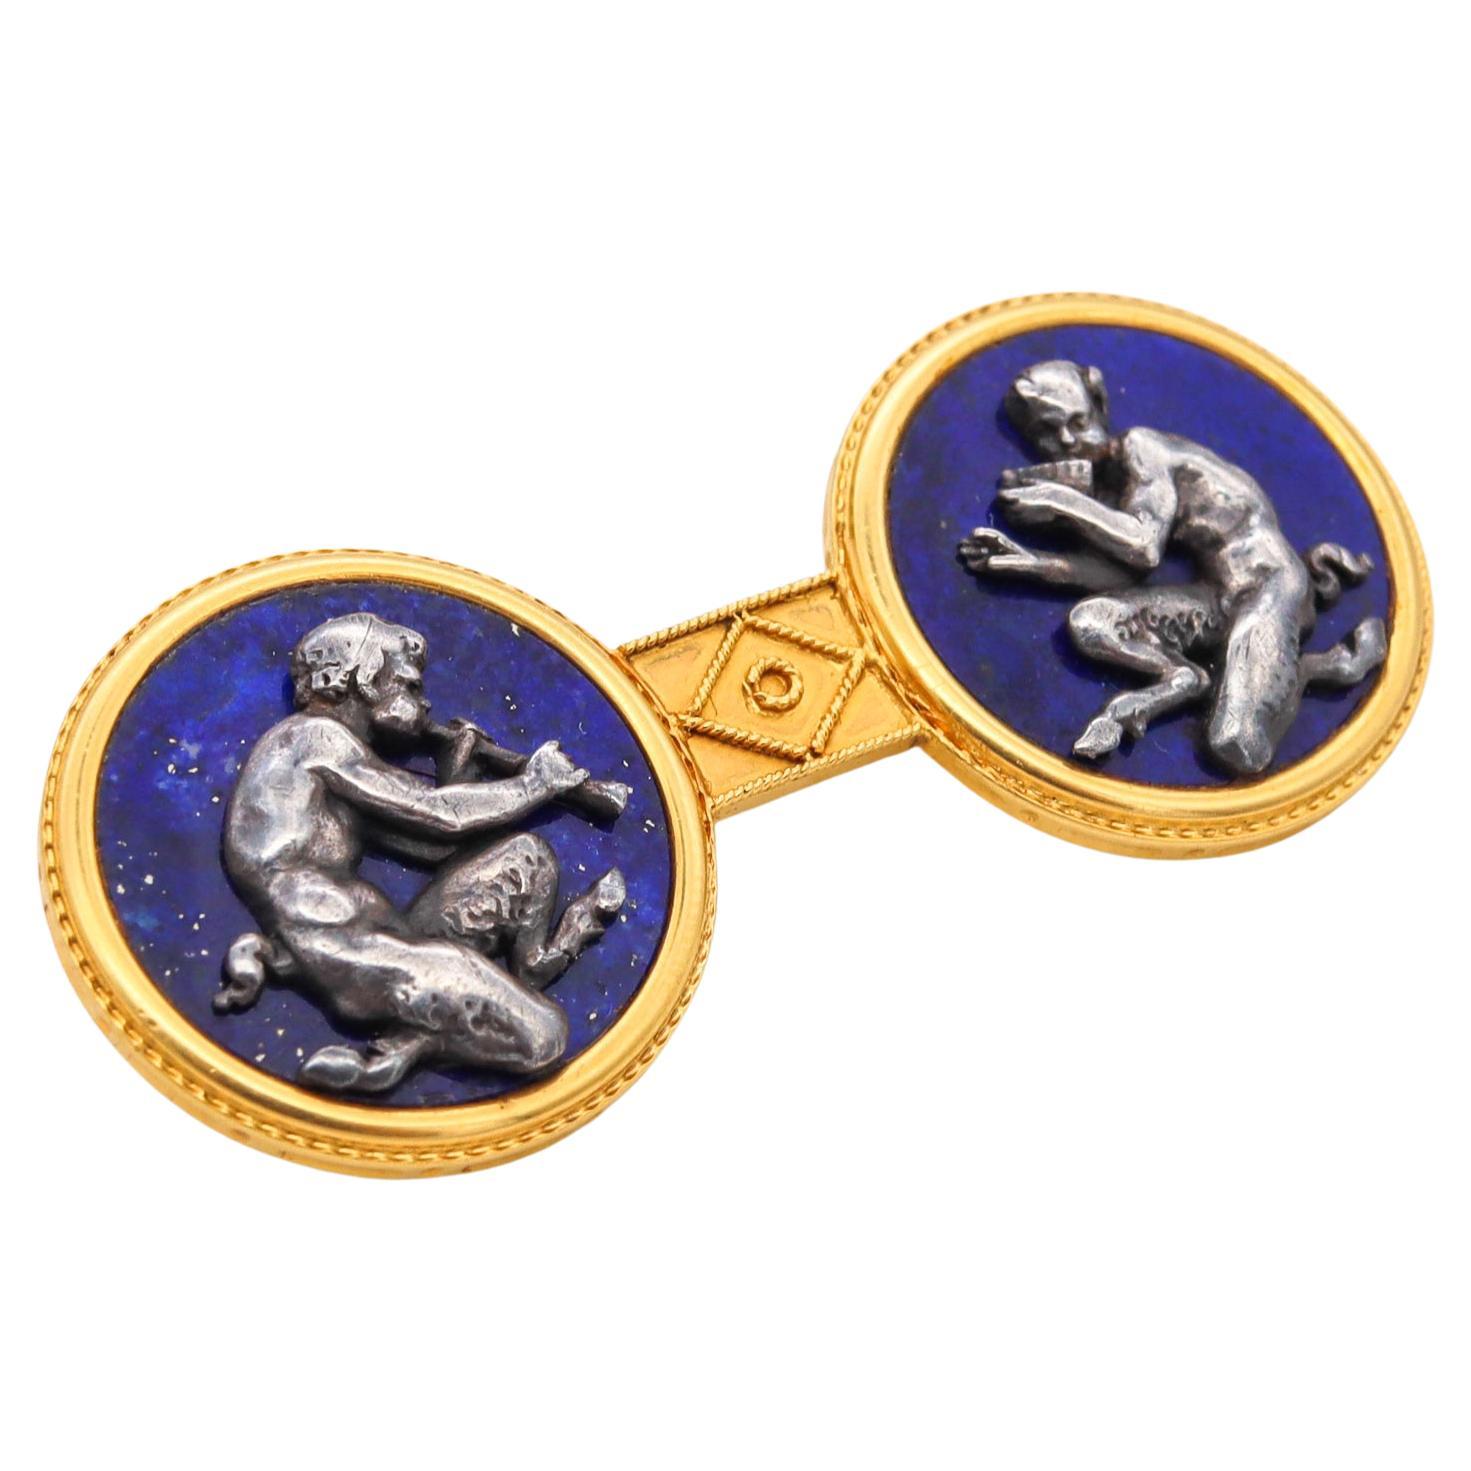 Etruscan brooch designed by Fannière Freres.

Very rare and important piece, created in Paris France by the house of Fanniere Freres, back in the 1880. This nice collector's piece has been crafted, with Napoleon III Renaissance-Etruscan Revival